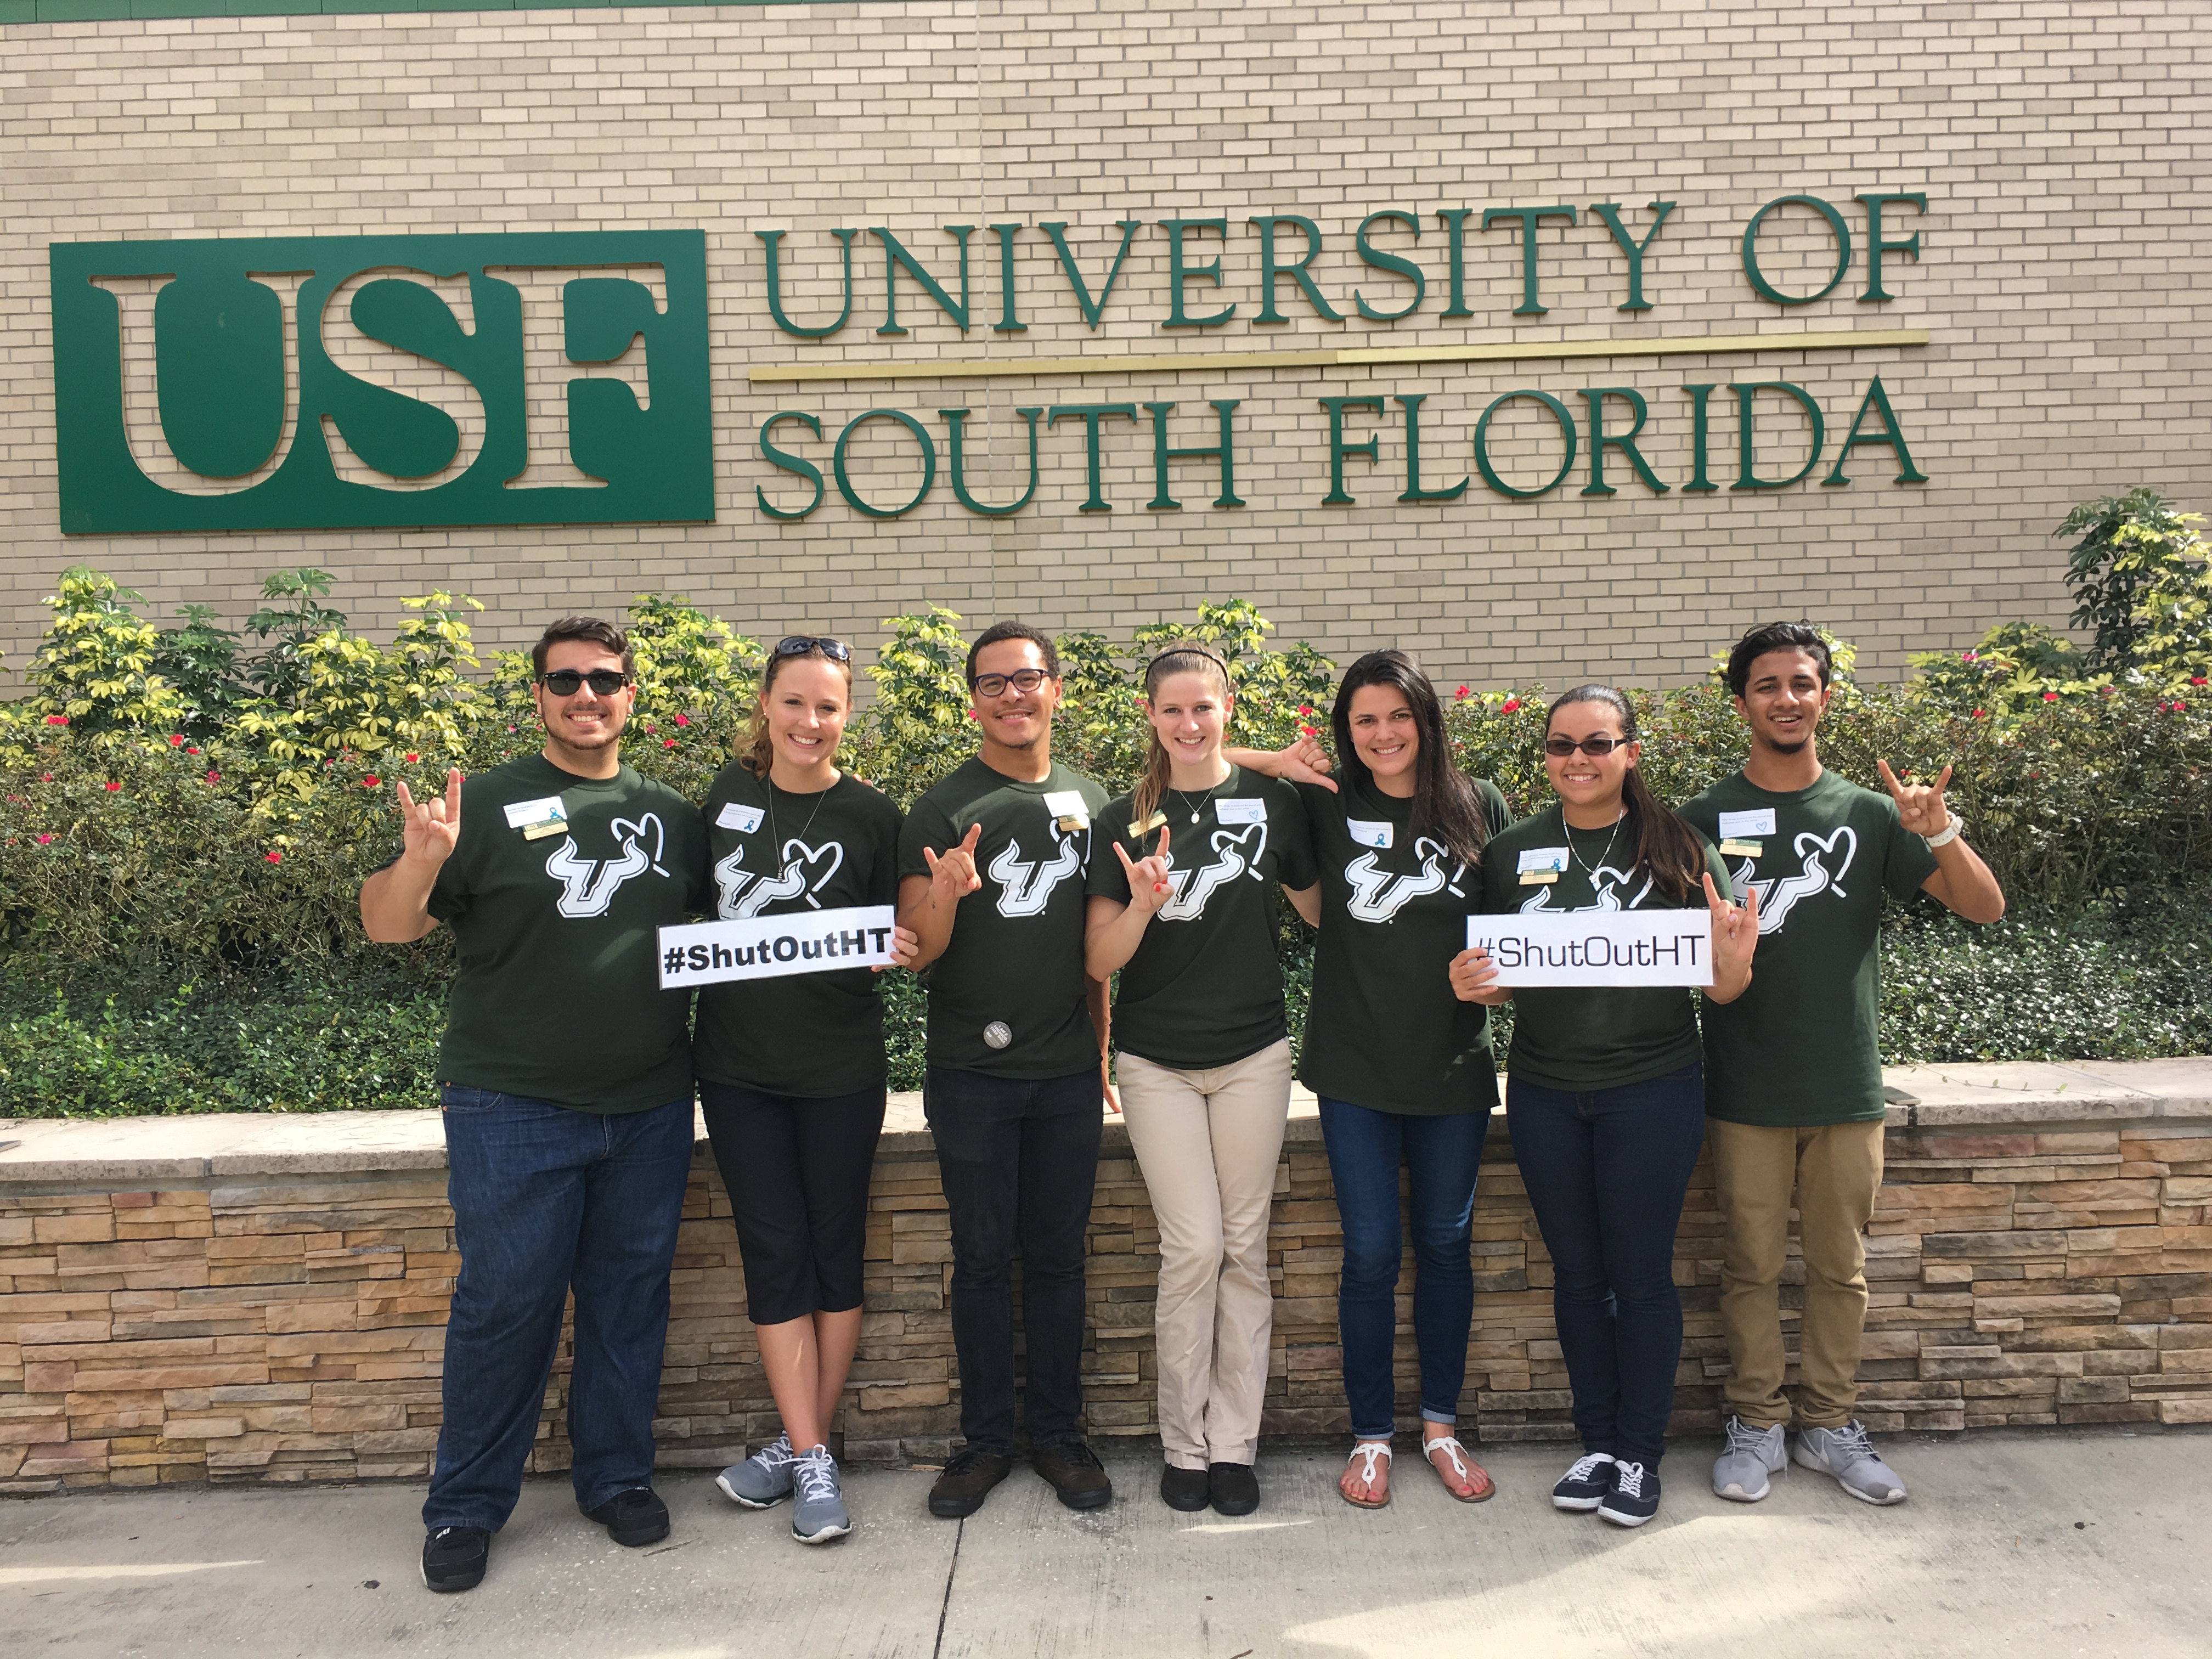 USF Students Throw Up Their Bull Horns to Shut Out Trafficking